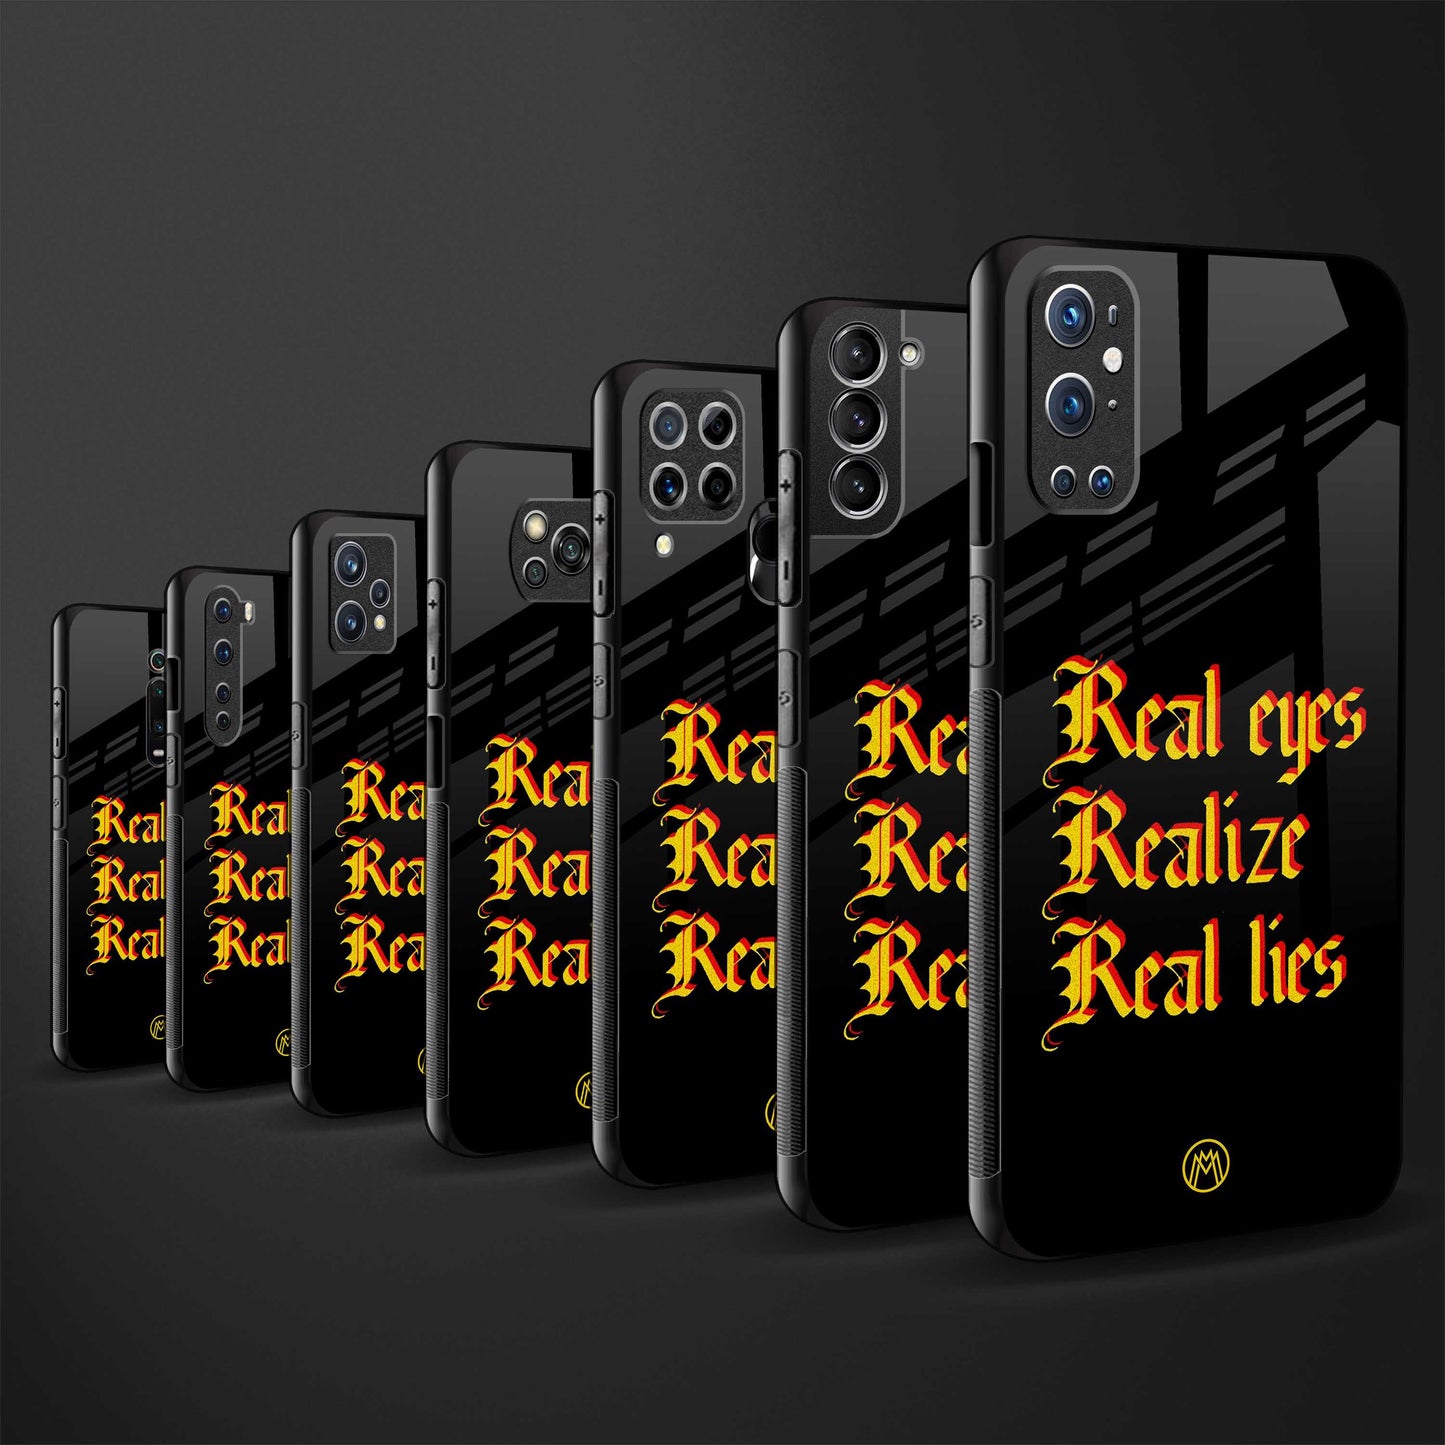 real eyes realize real lies quote glass case for redmi note 7 pro image-3